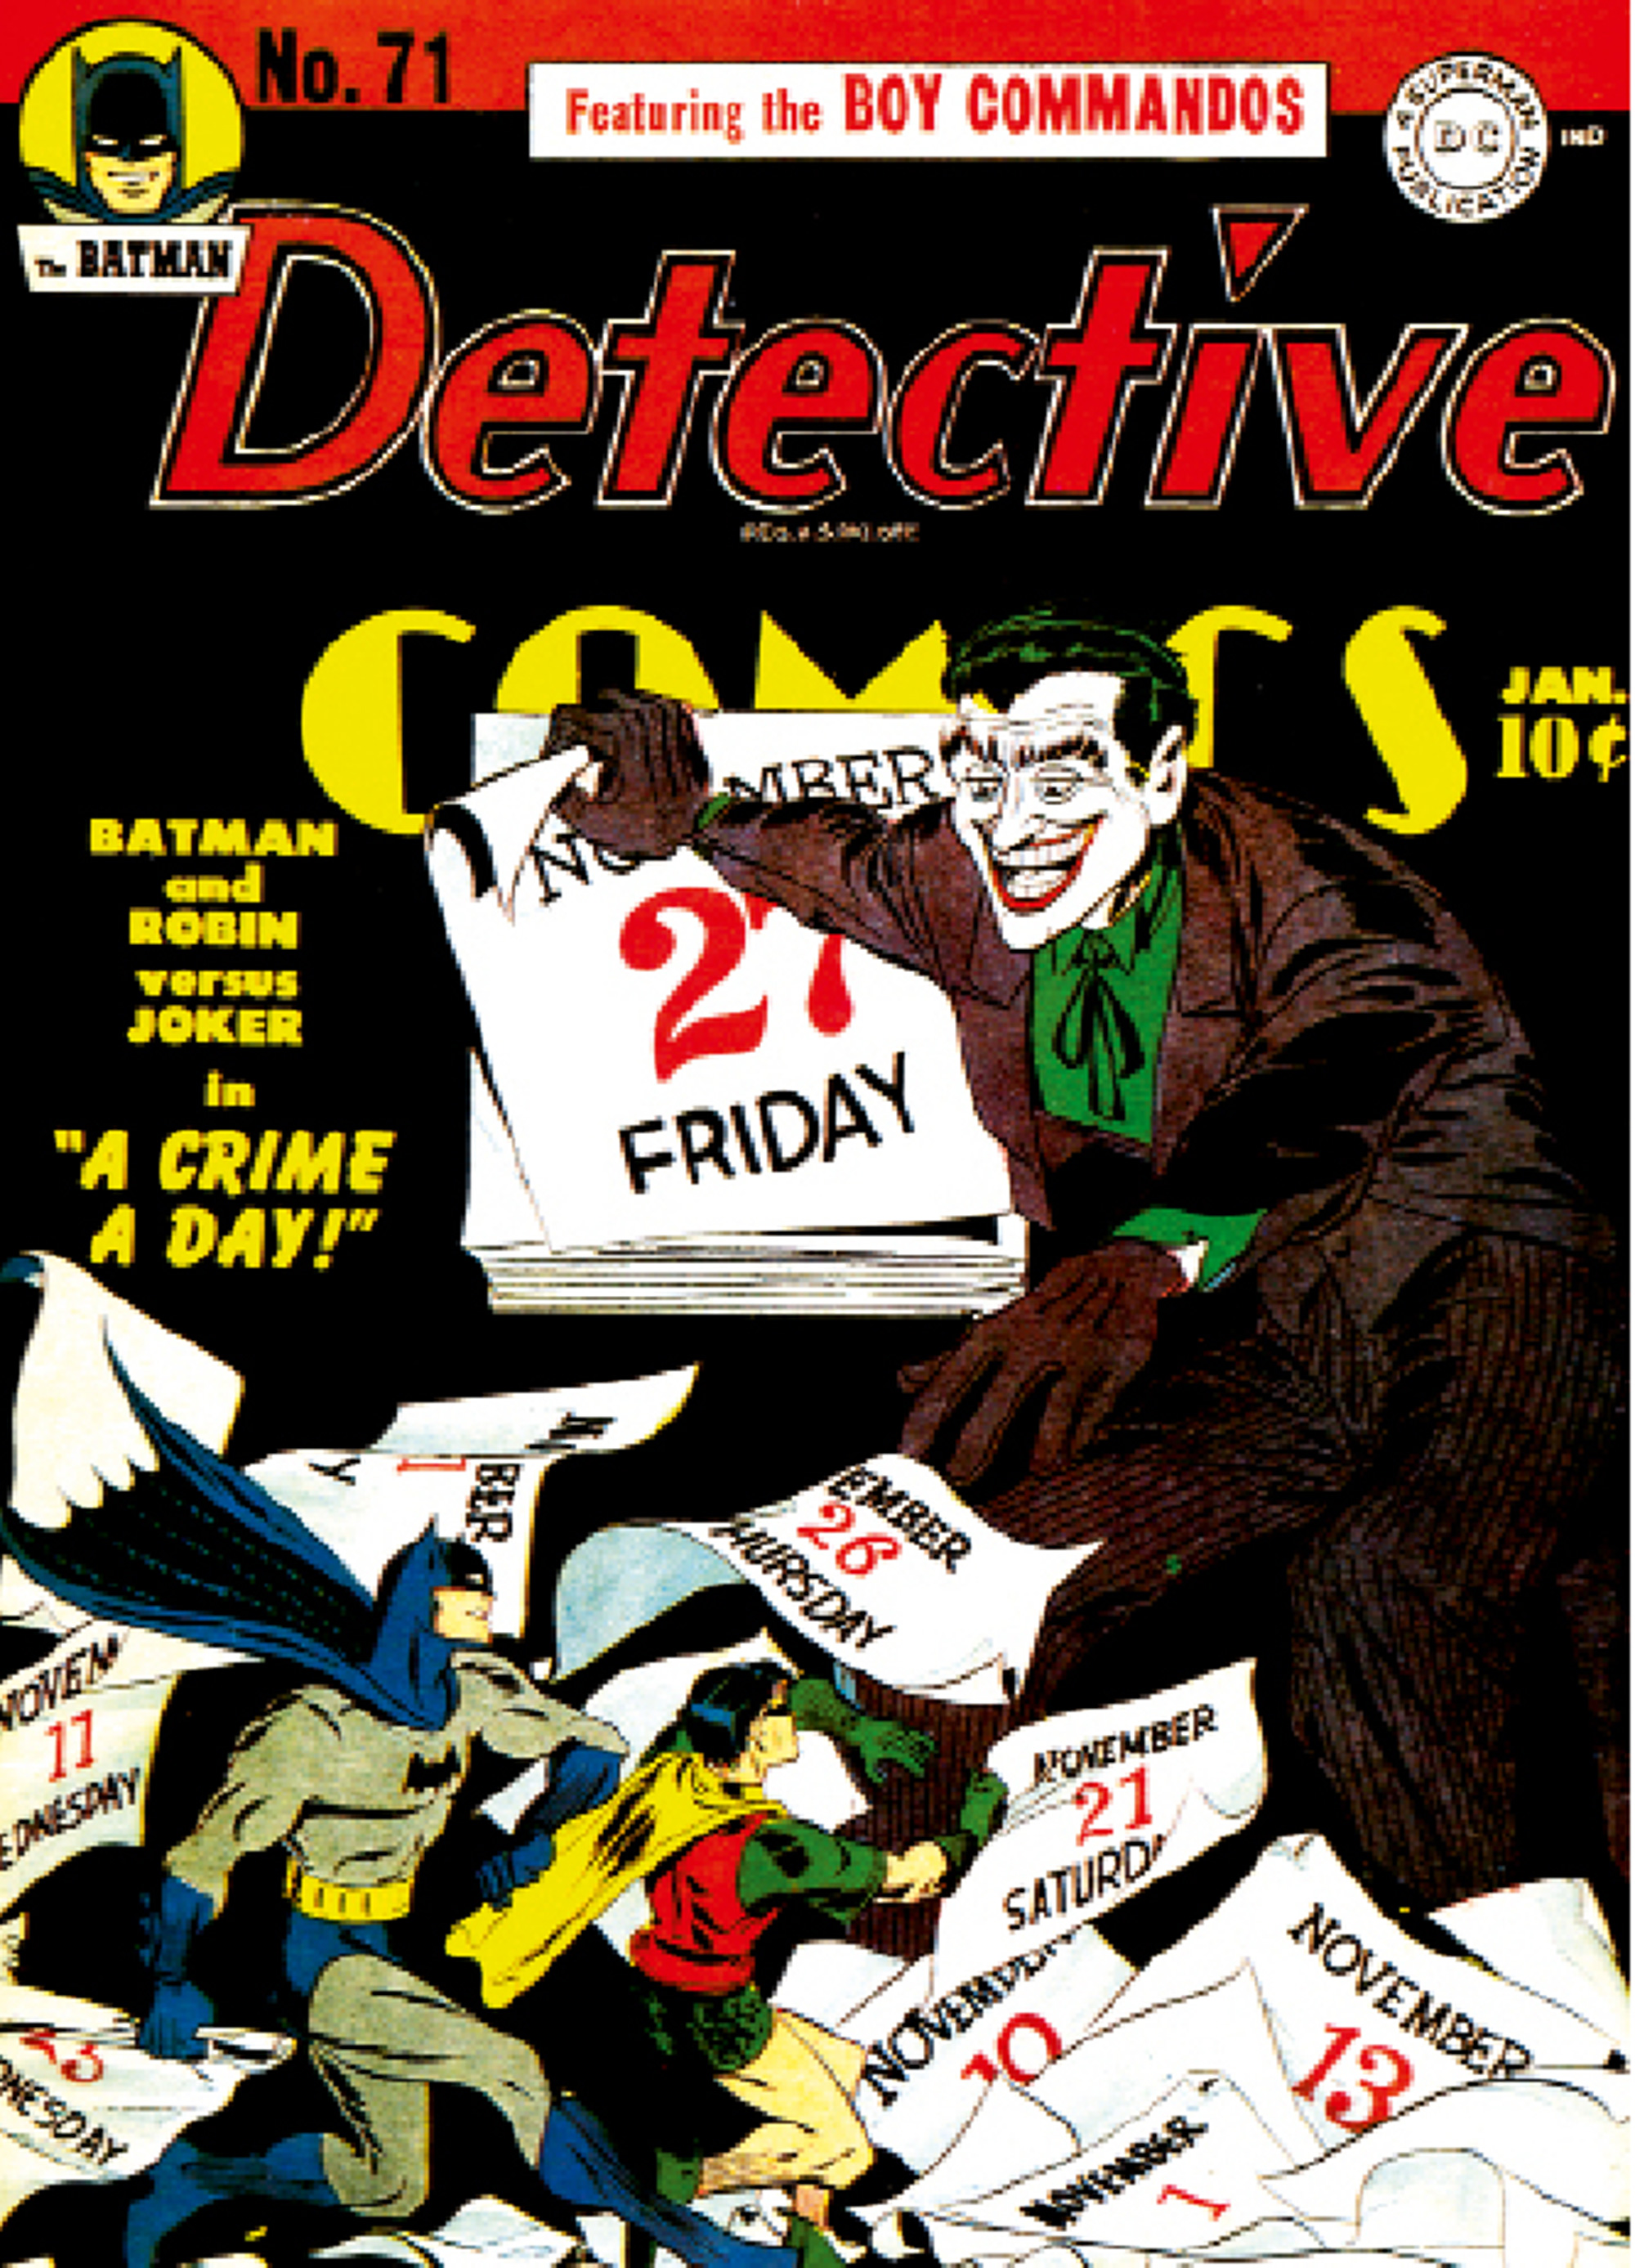 Early appearance of the Joker on the cover of Detective Comics #71, January 1943.